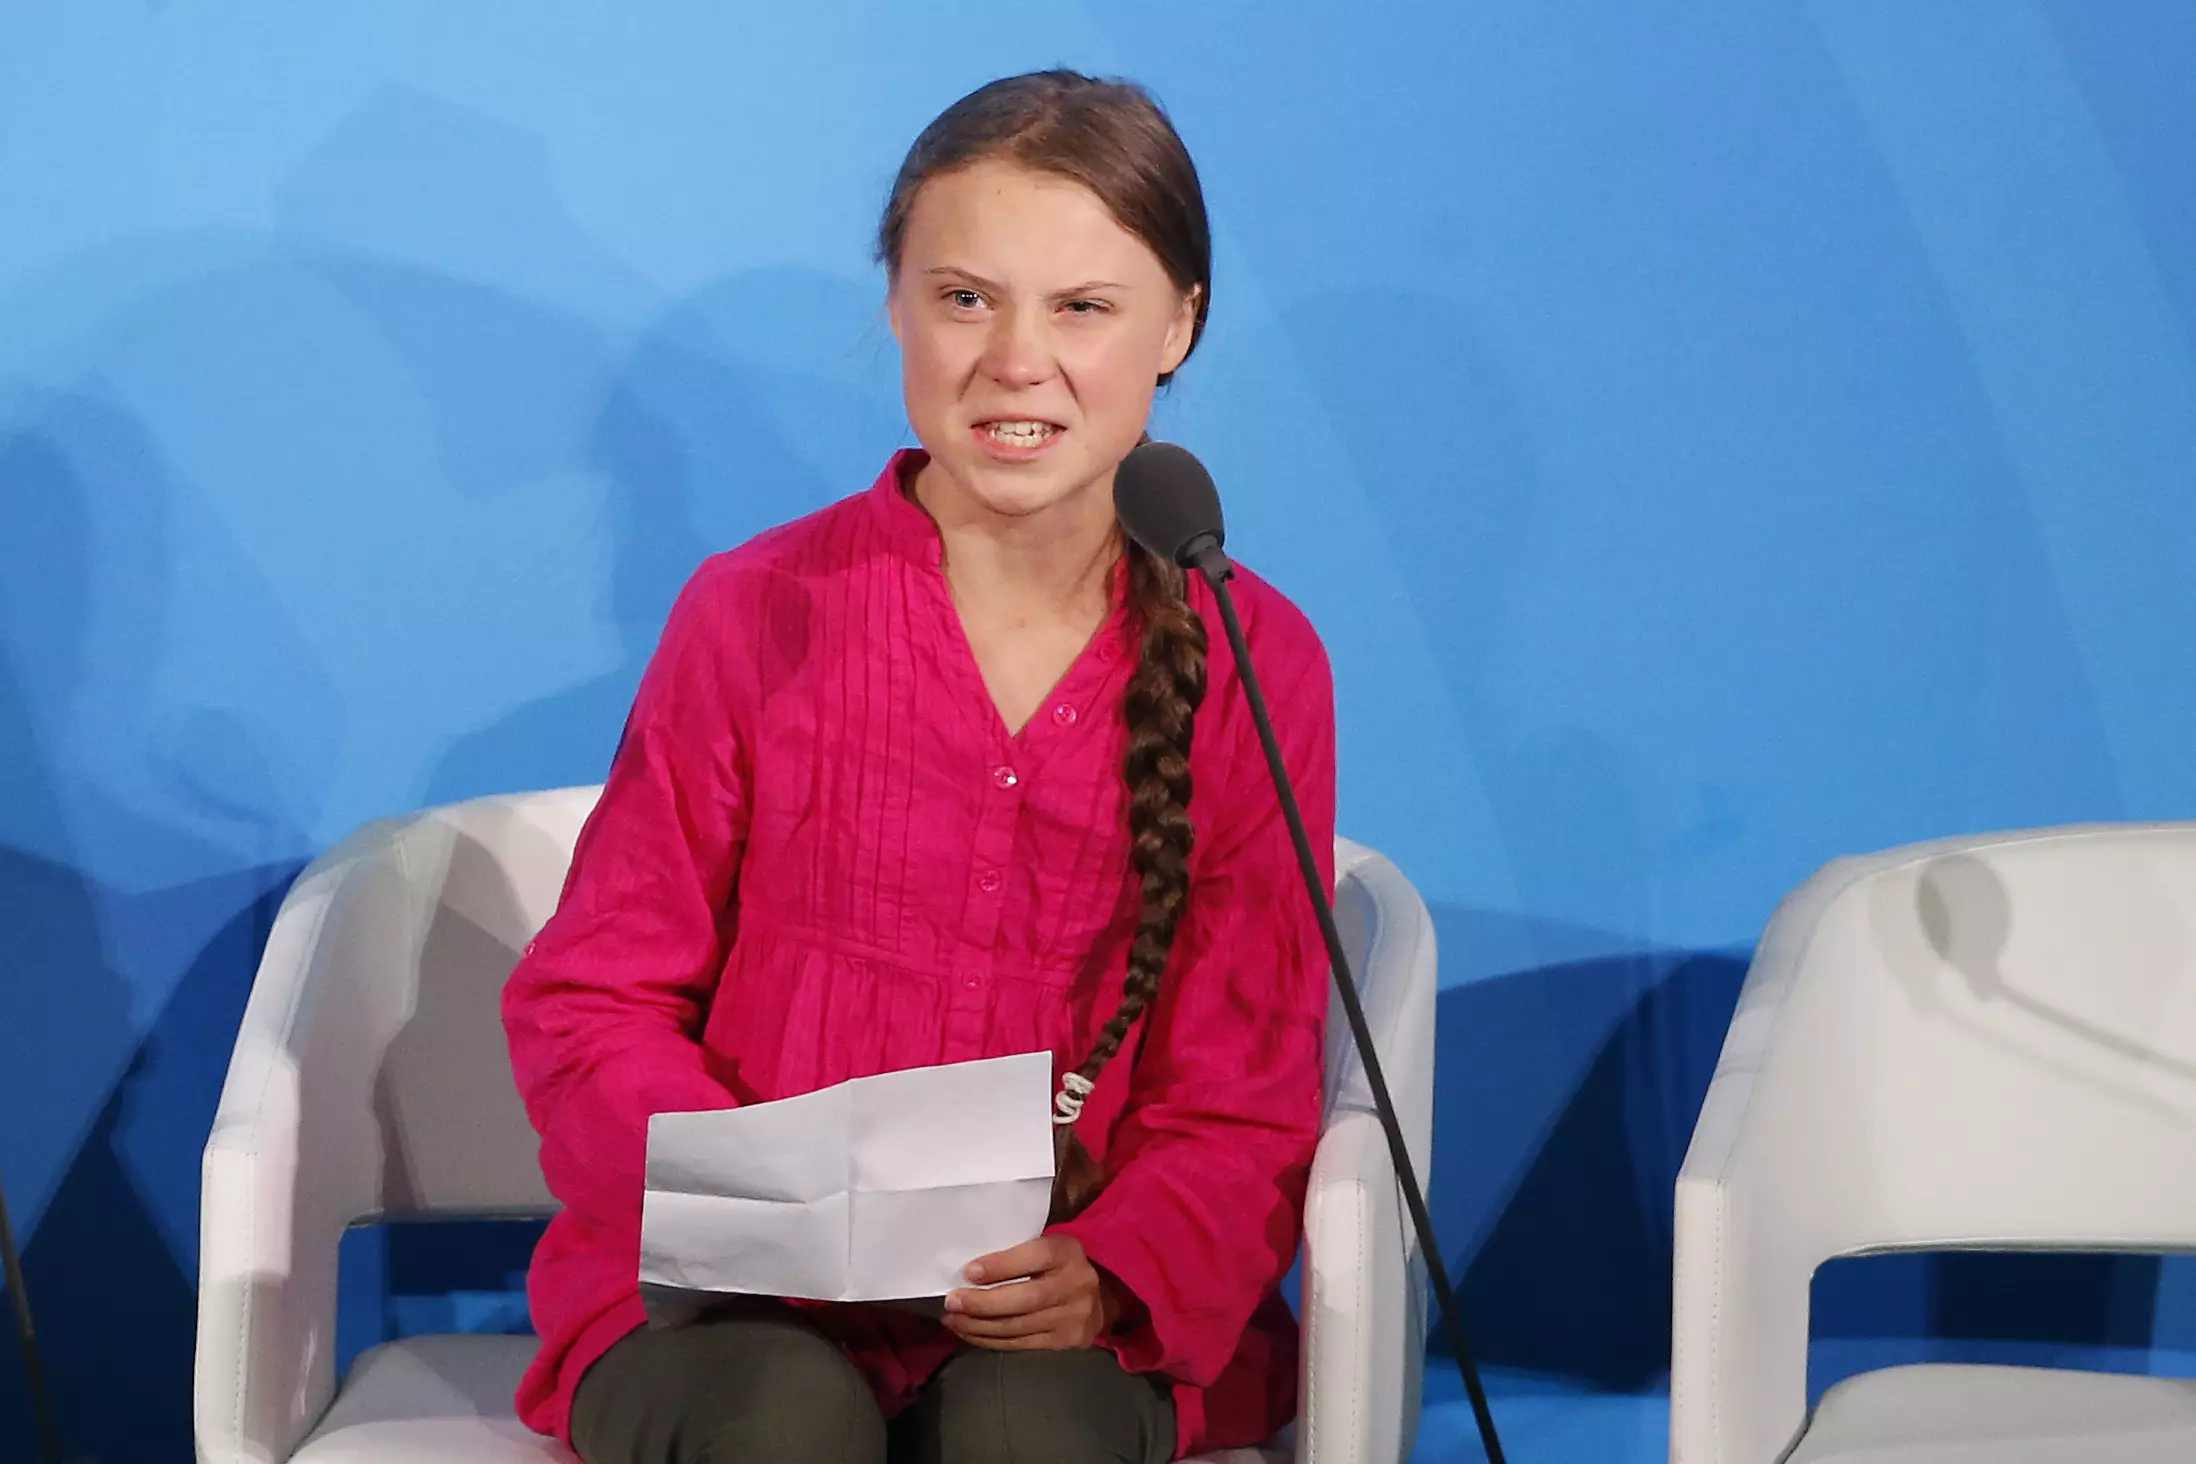 The 16-year-old gave a rousing speech at a UN conference last month.